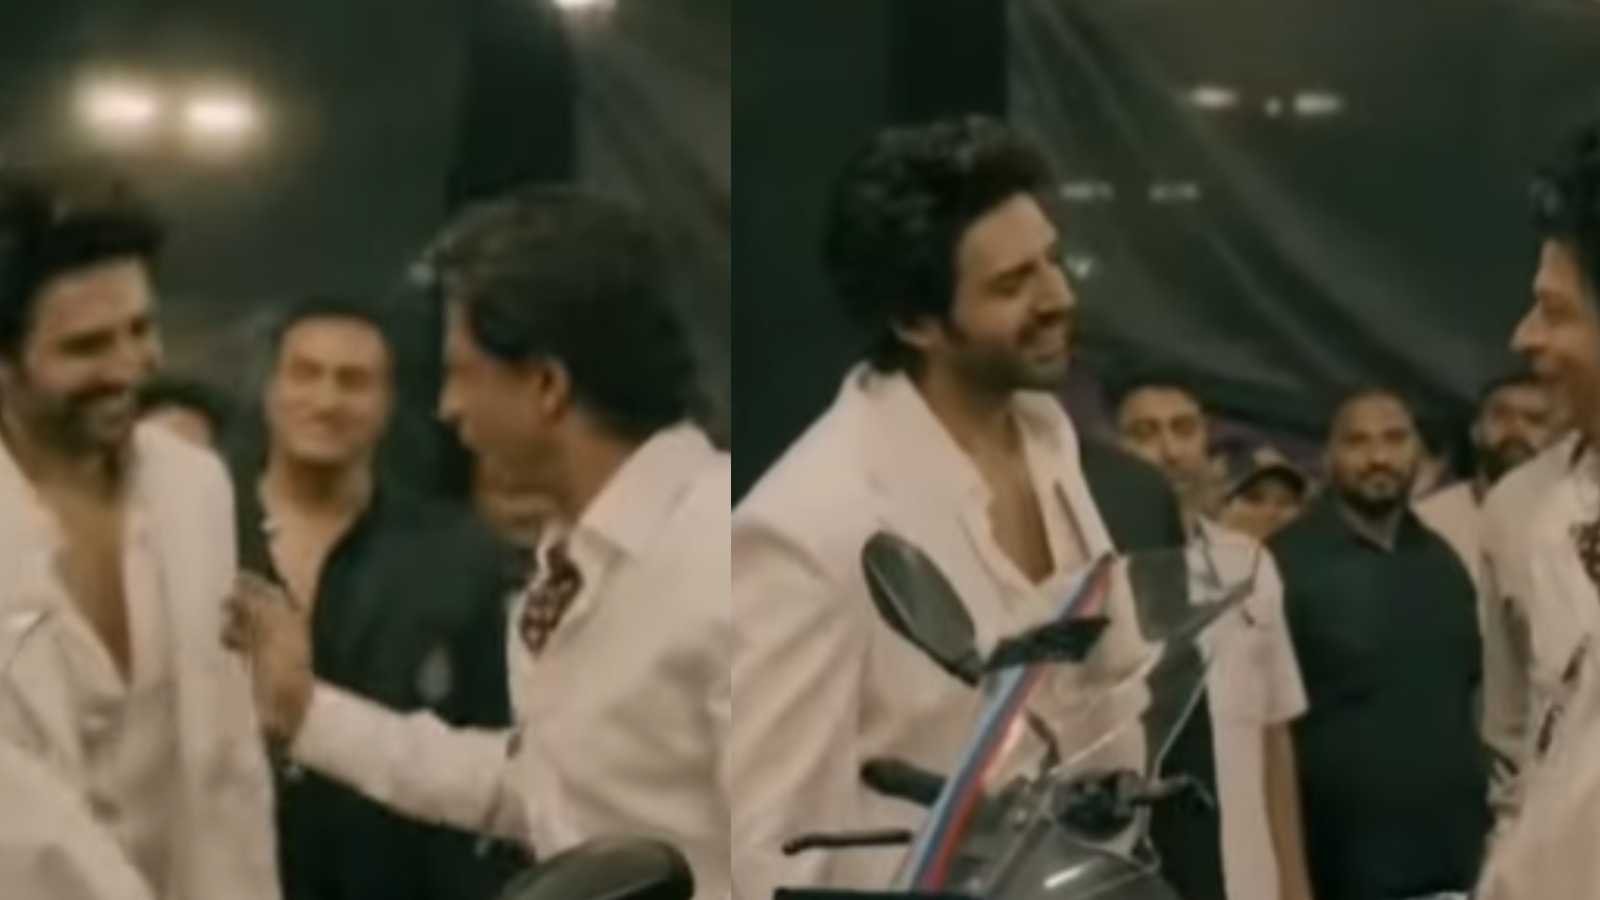 Shah Rukh Khan and Kartik Aaryan's reunion will make you manifest the two coming together for a film